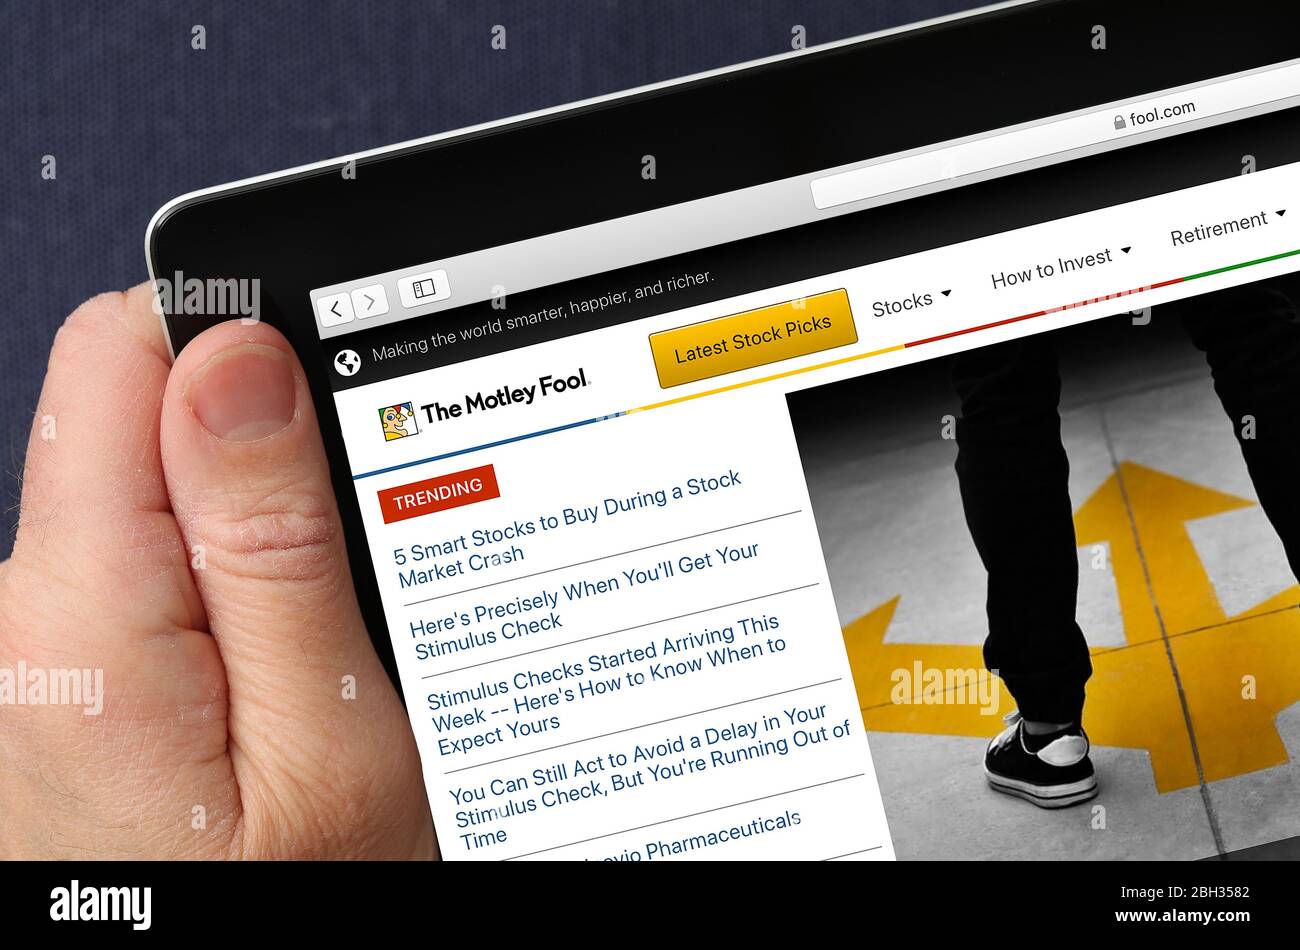 Motley Fool website viewed on an iPad (editorial use only) Stock Photo